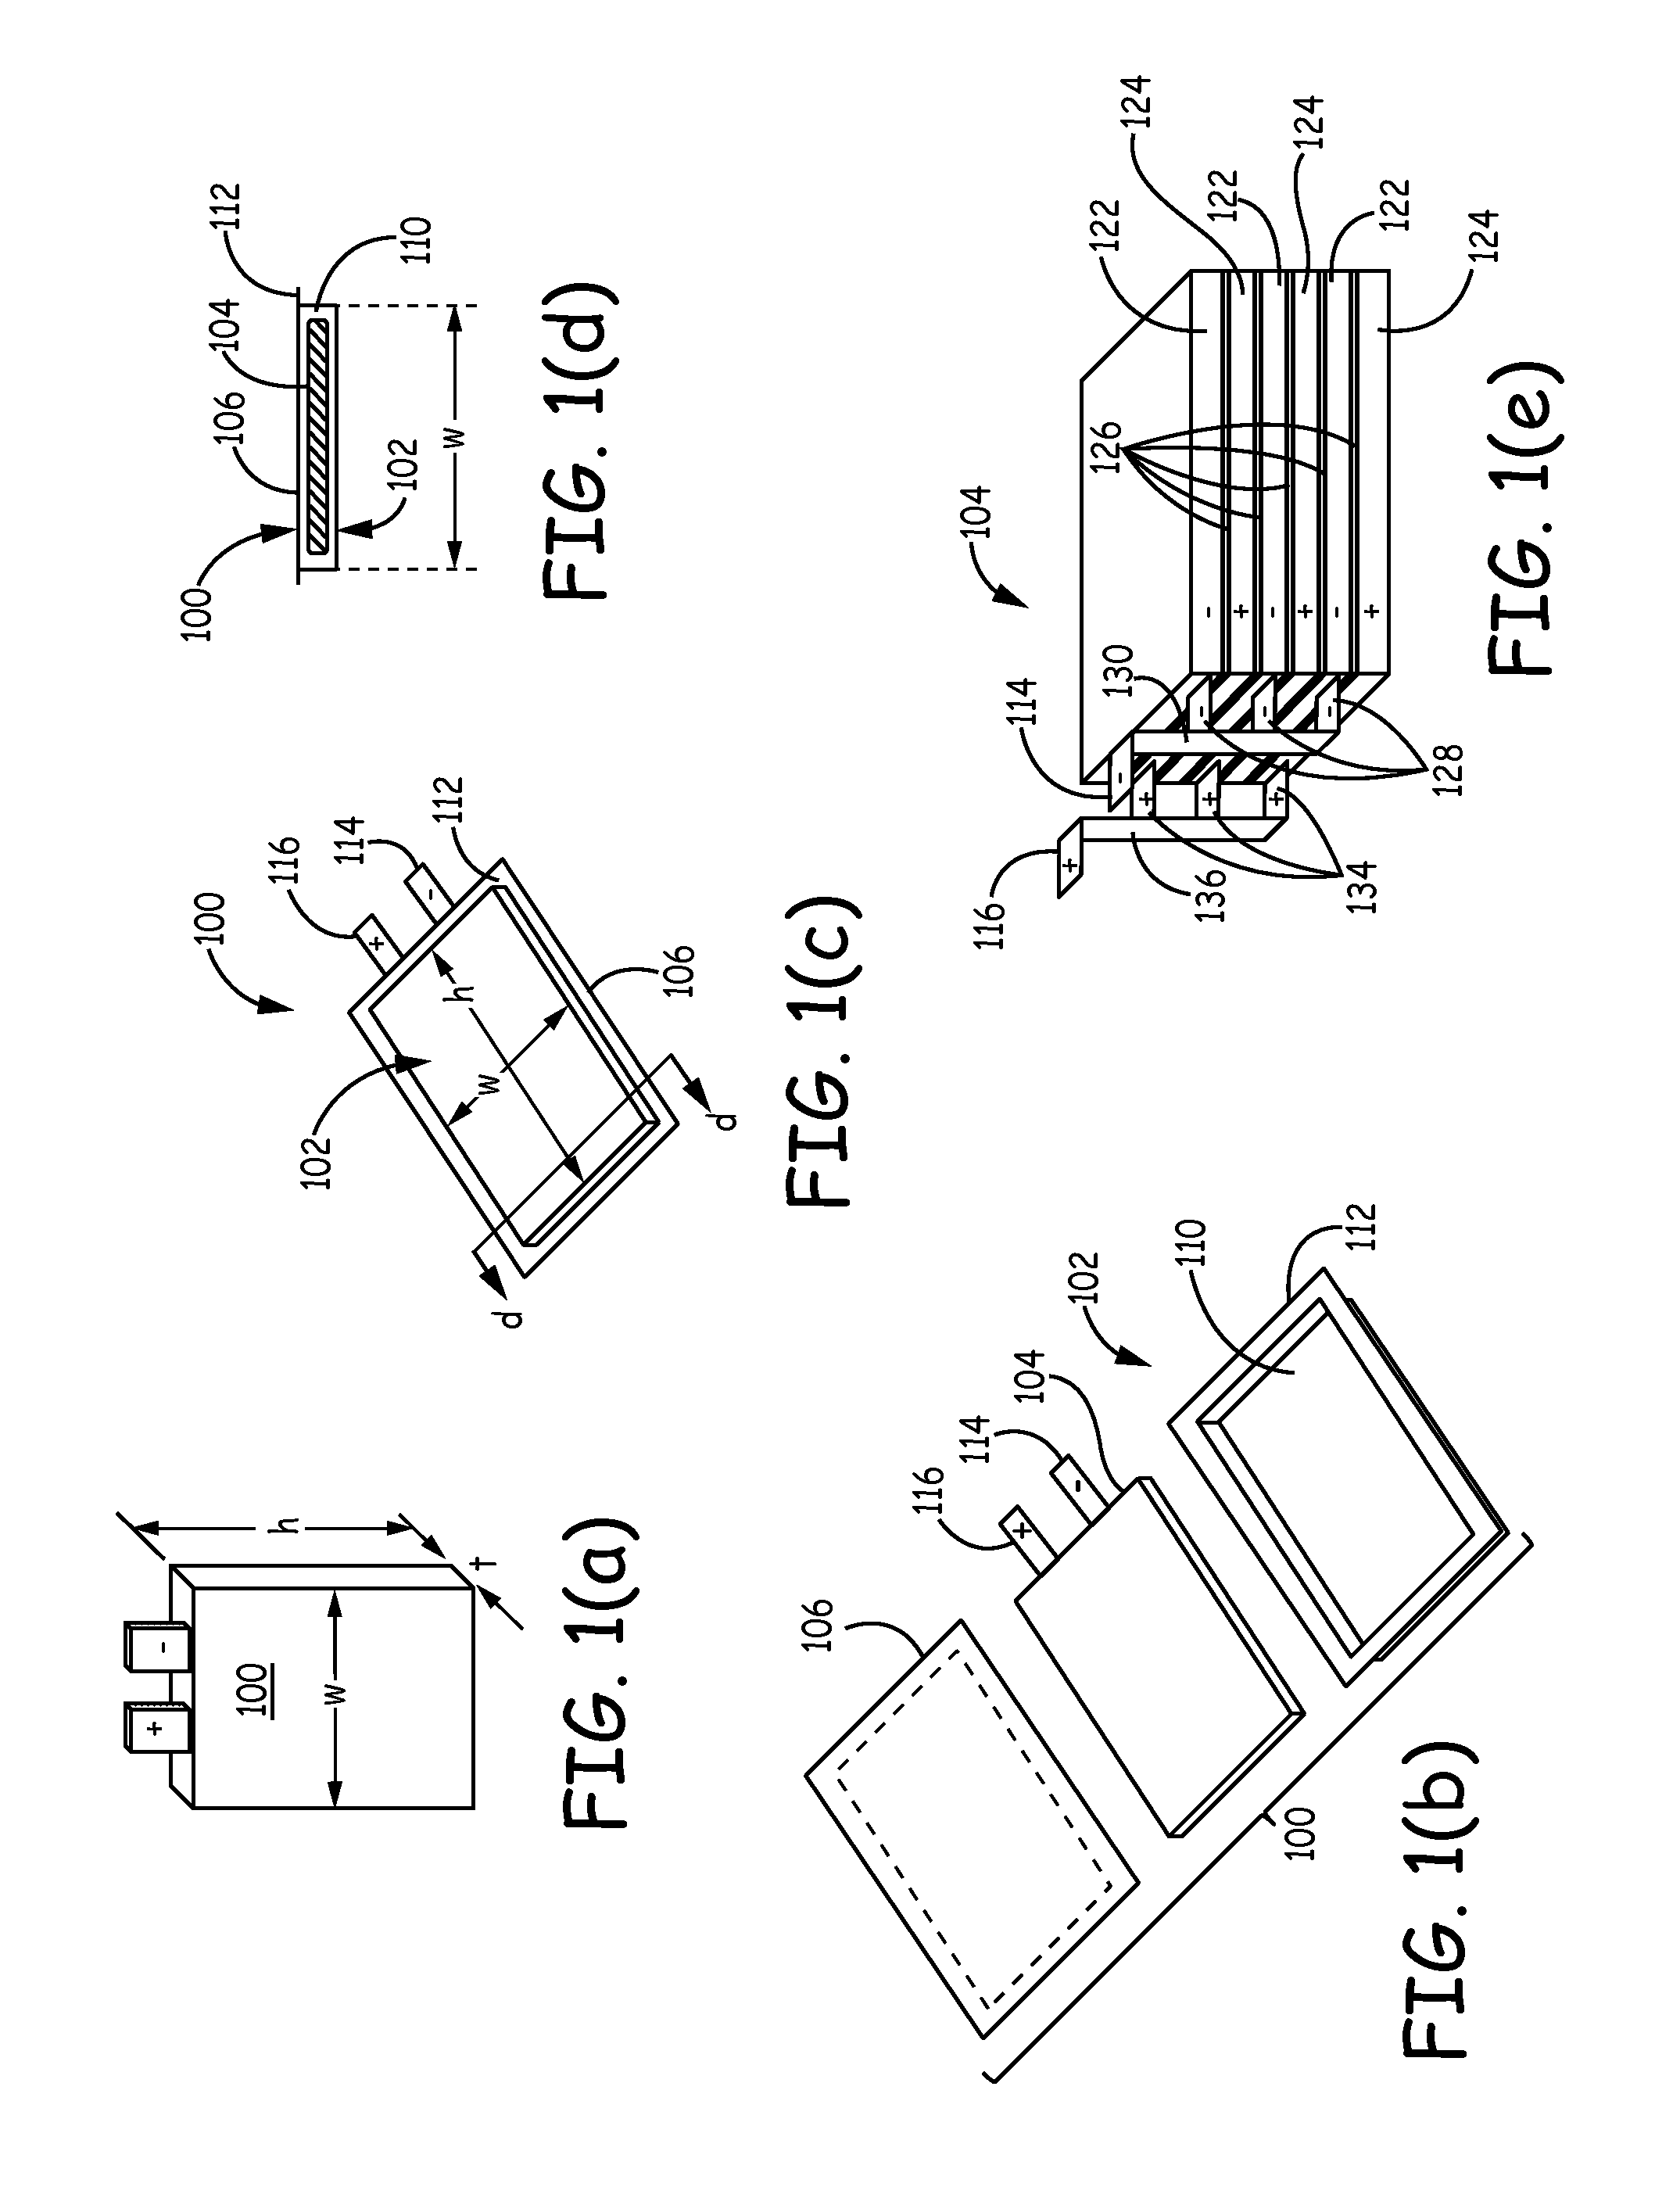 Silicon-silicon oxide-carbon composites for lithium battery electrodes and methods for forming the composites